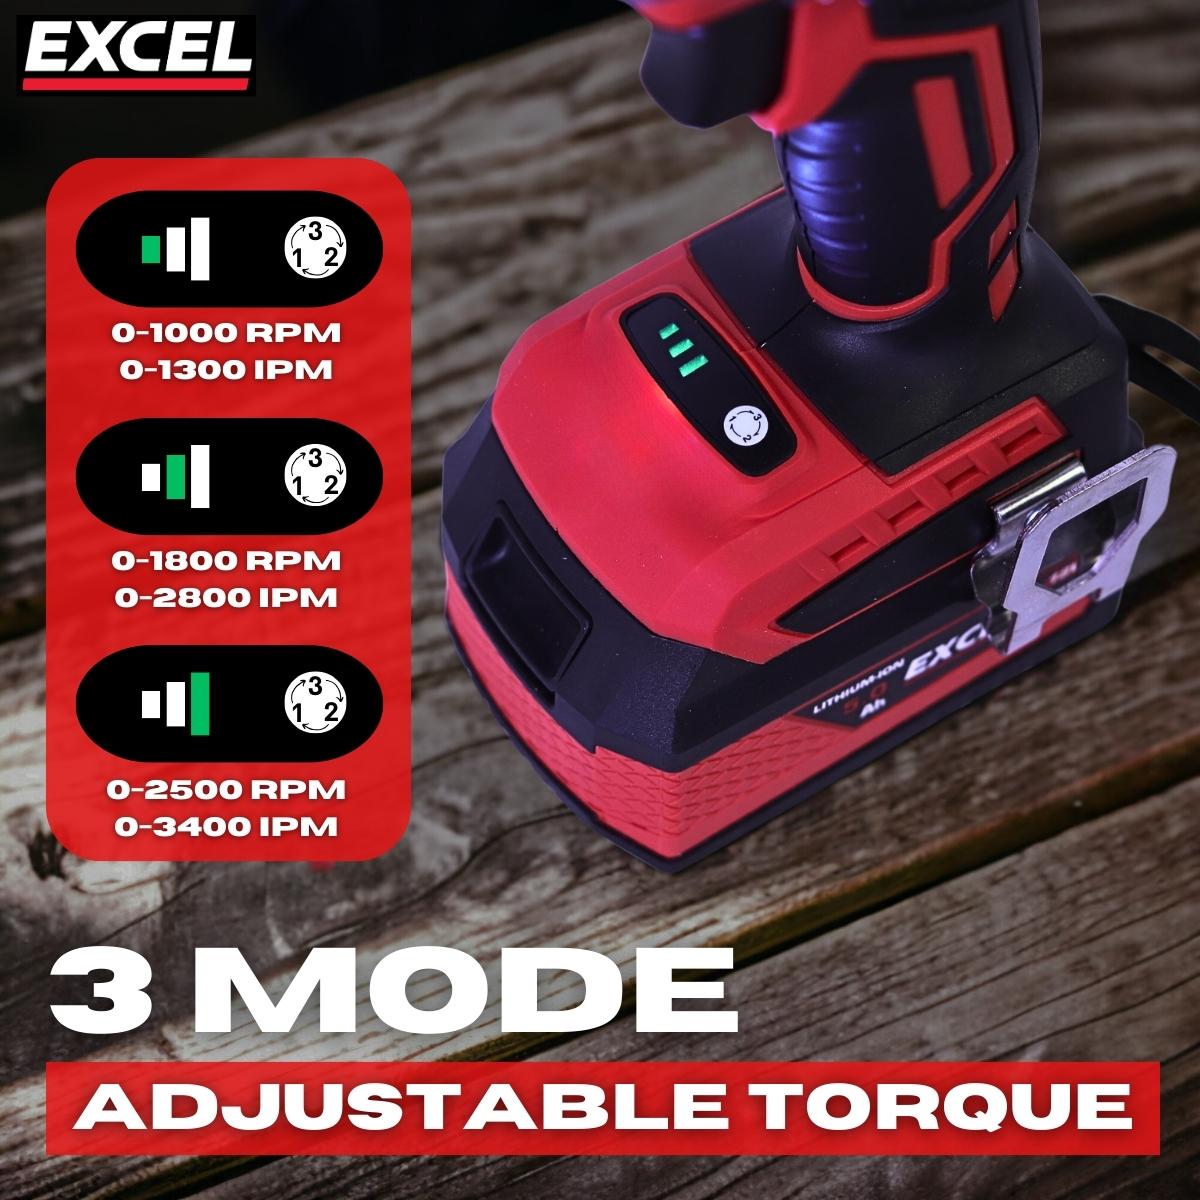 Excel 18V Cordless Brushless 1/2'' Impact Wrench with 1 x 5.0Ah Battery & Charger